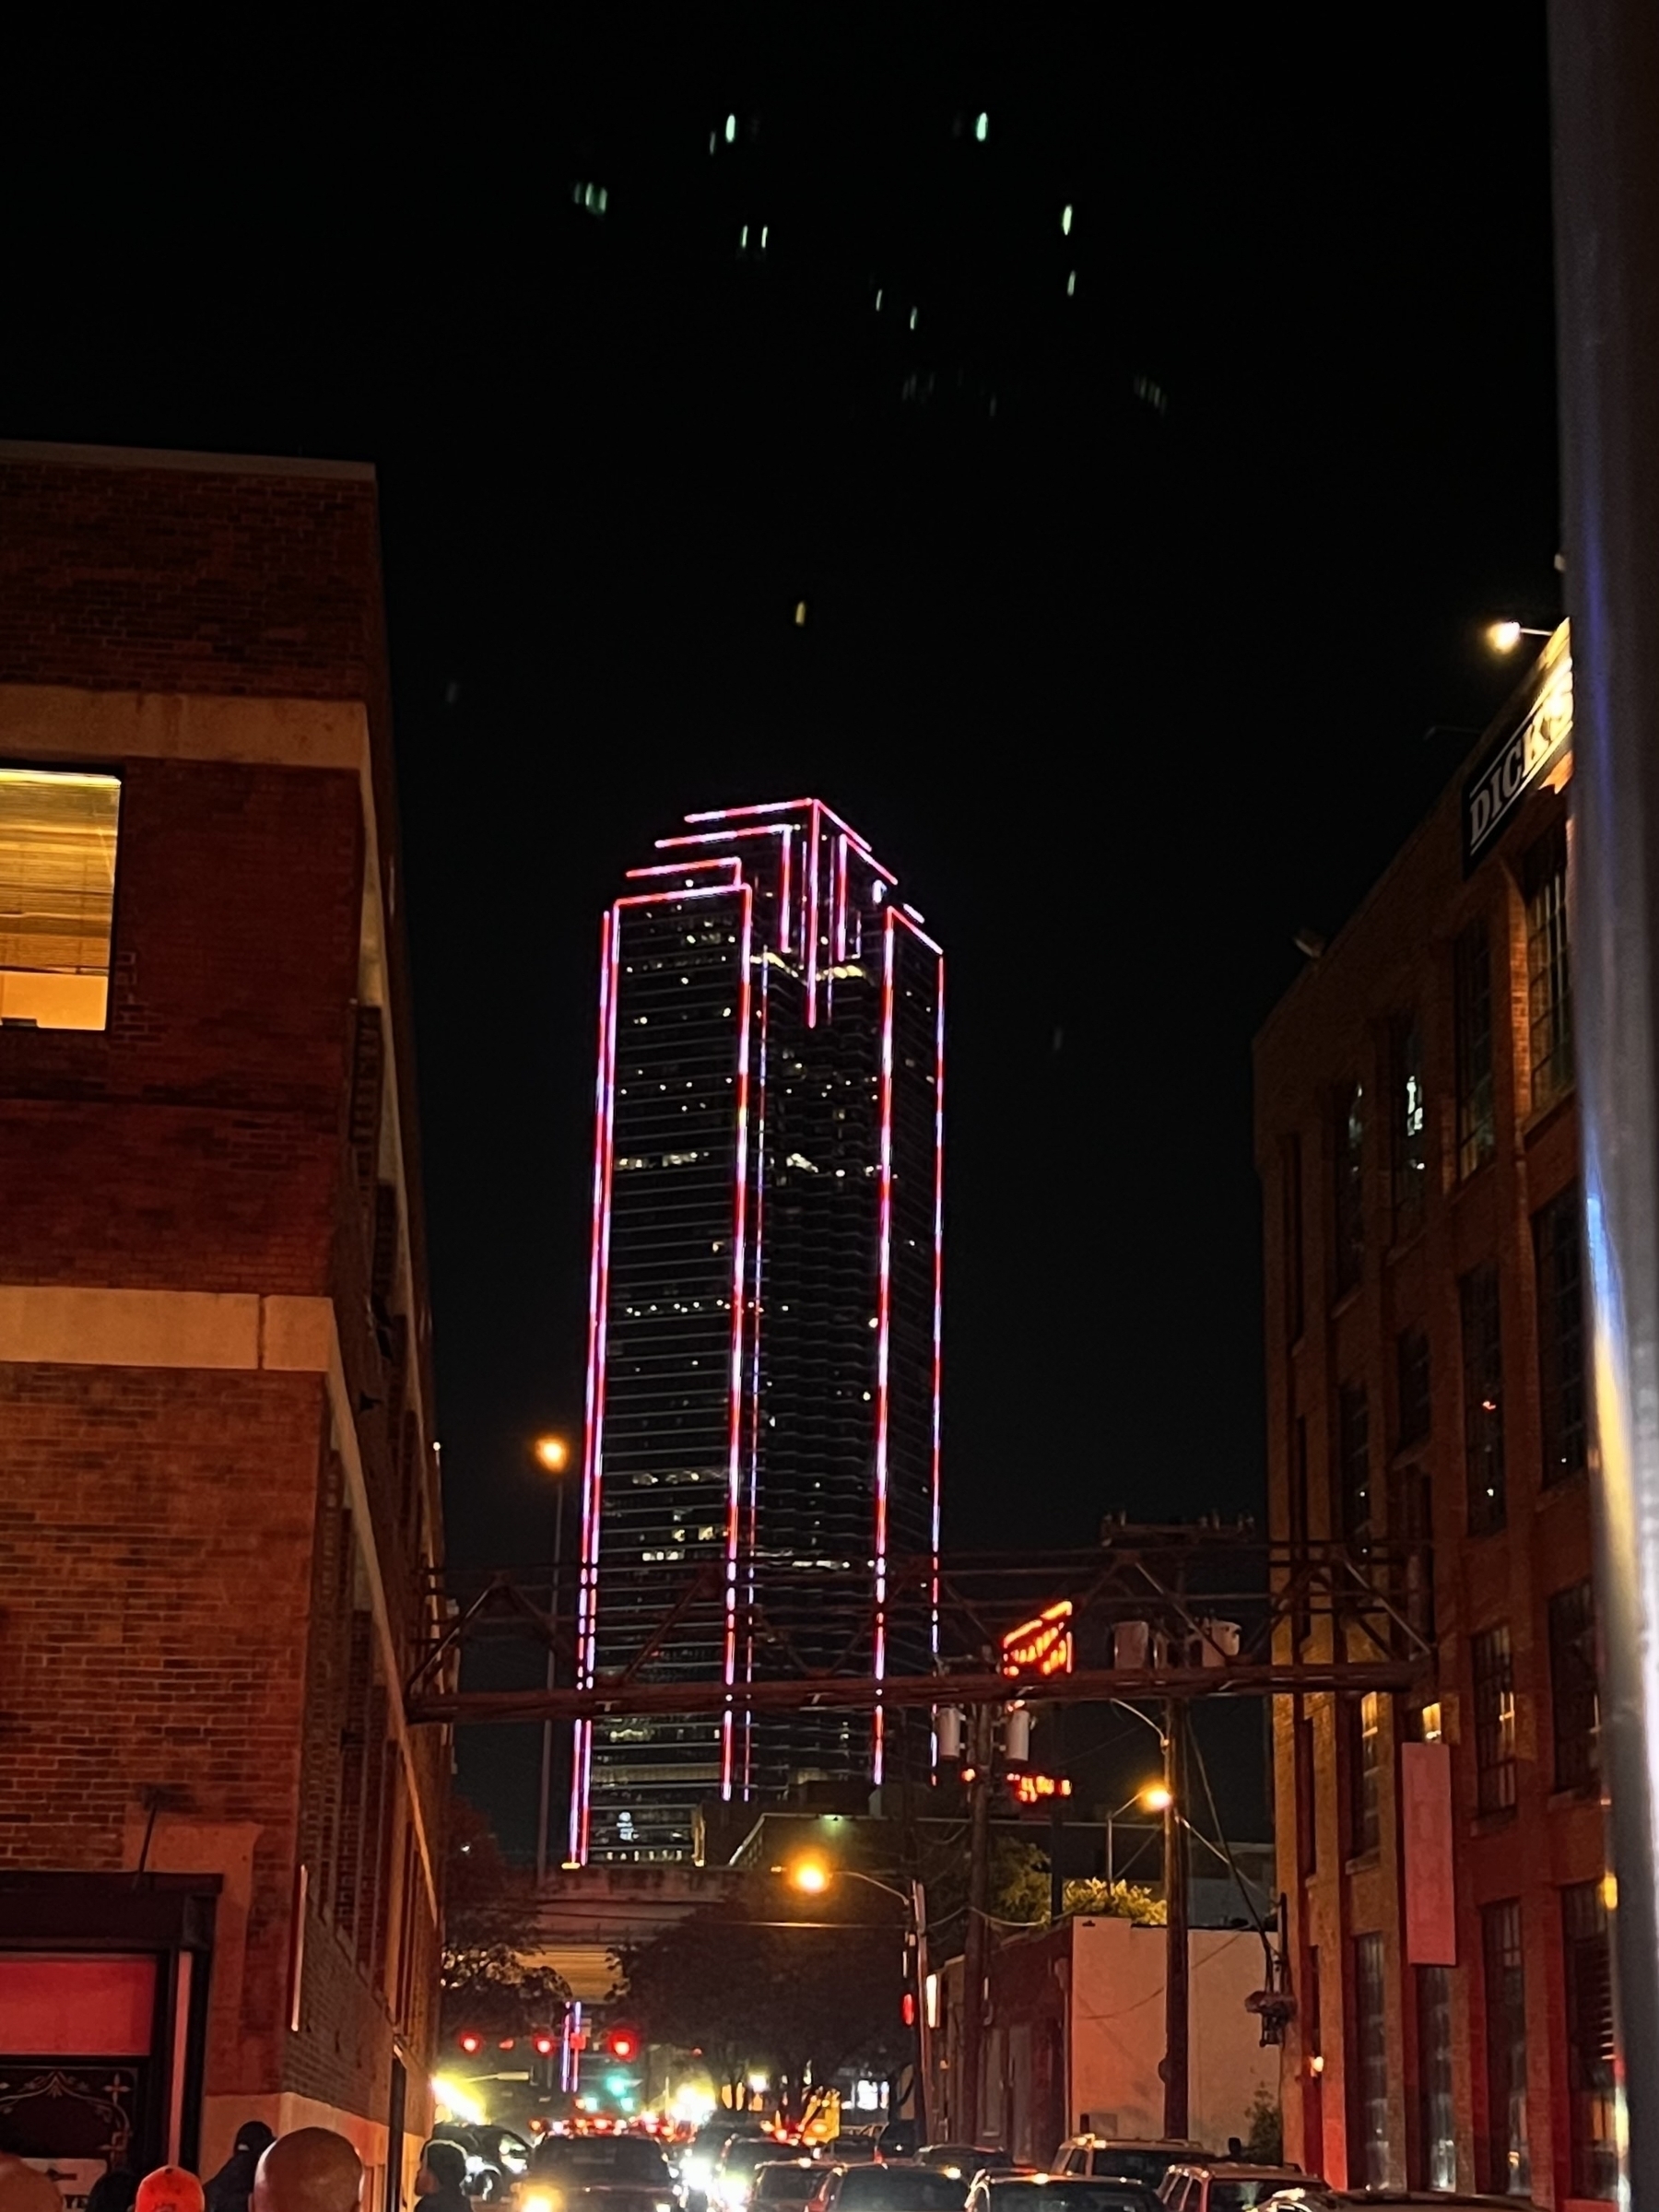 Dallas night skyline. Skyscraper with candy cane red and white lights surrounding silhouette of the skyscraper. 